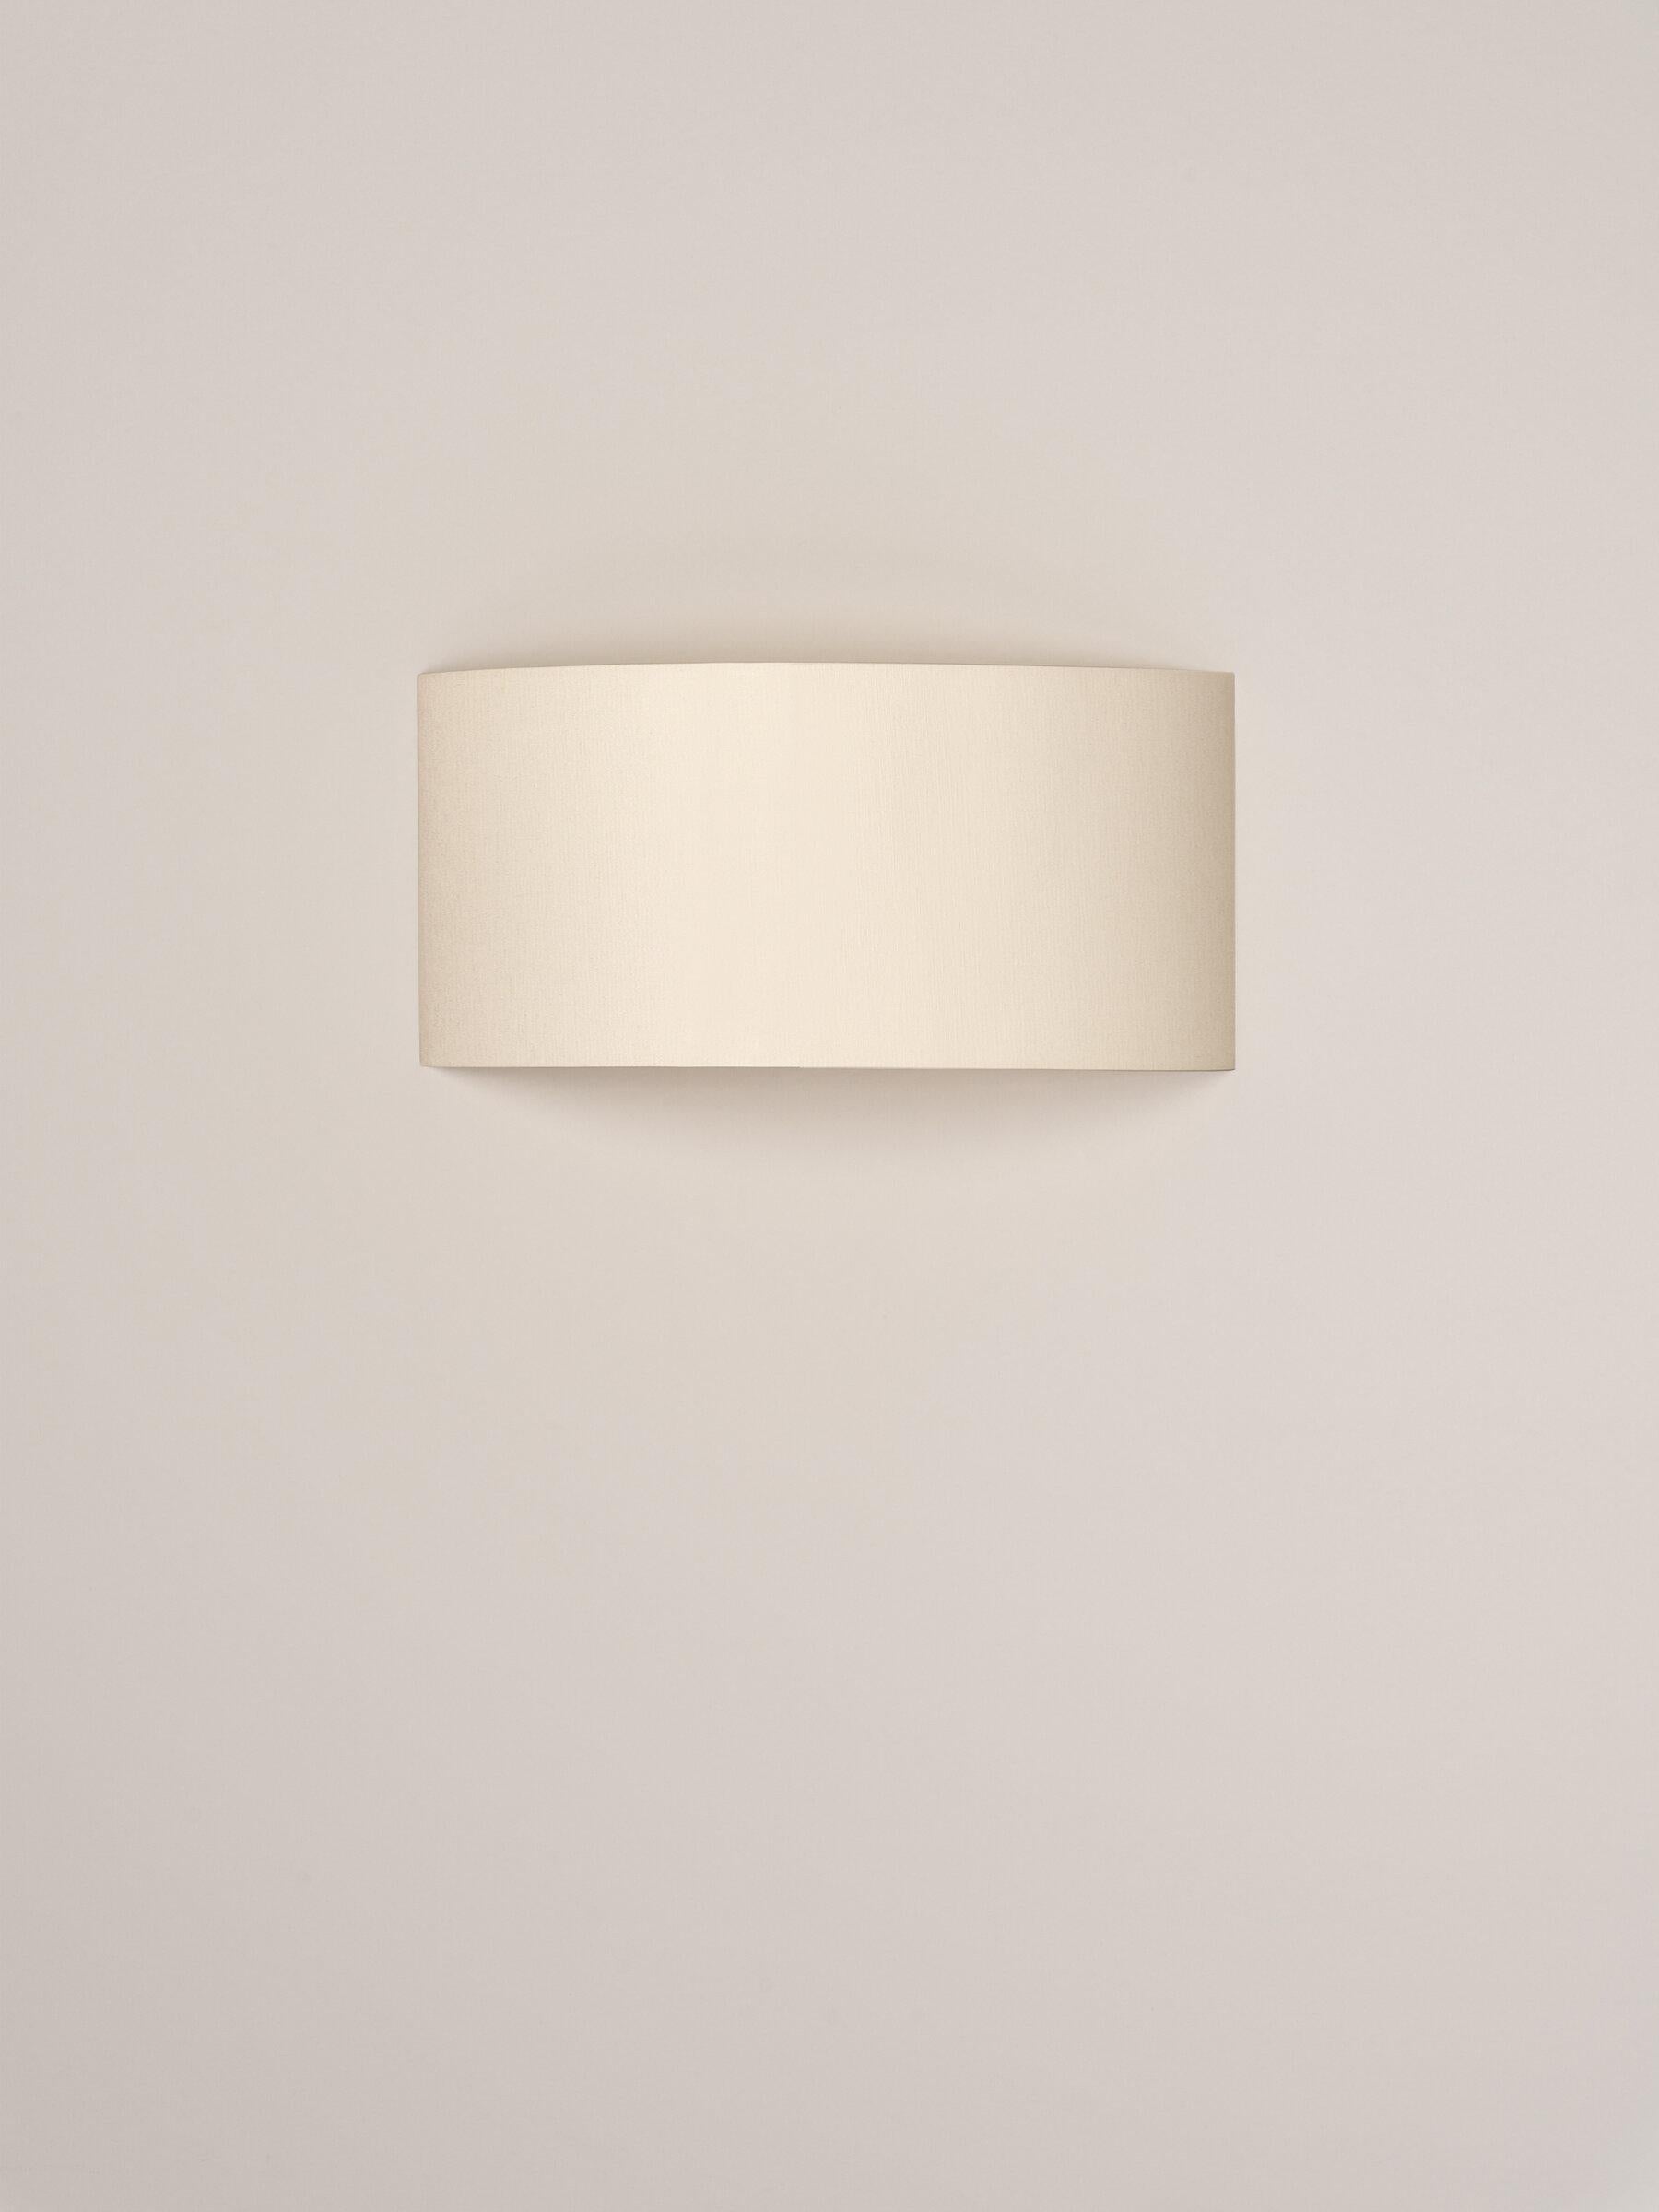 White Comodín rectangular wall lamp by Santa & Cole
Dimensions: D 50 x W 13 x H 24 cm
Materials: Metal, linen.

This minimalist wall lamp humanises neutral spaces with its colourful and functional sobriety. The shade is fondly hand-ribboned,